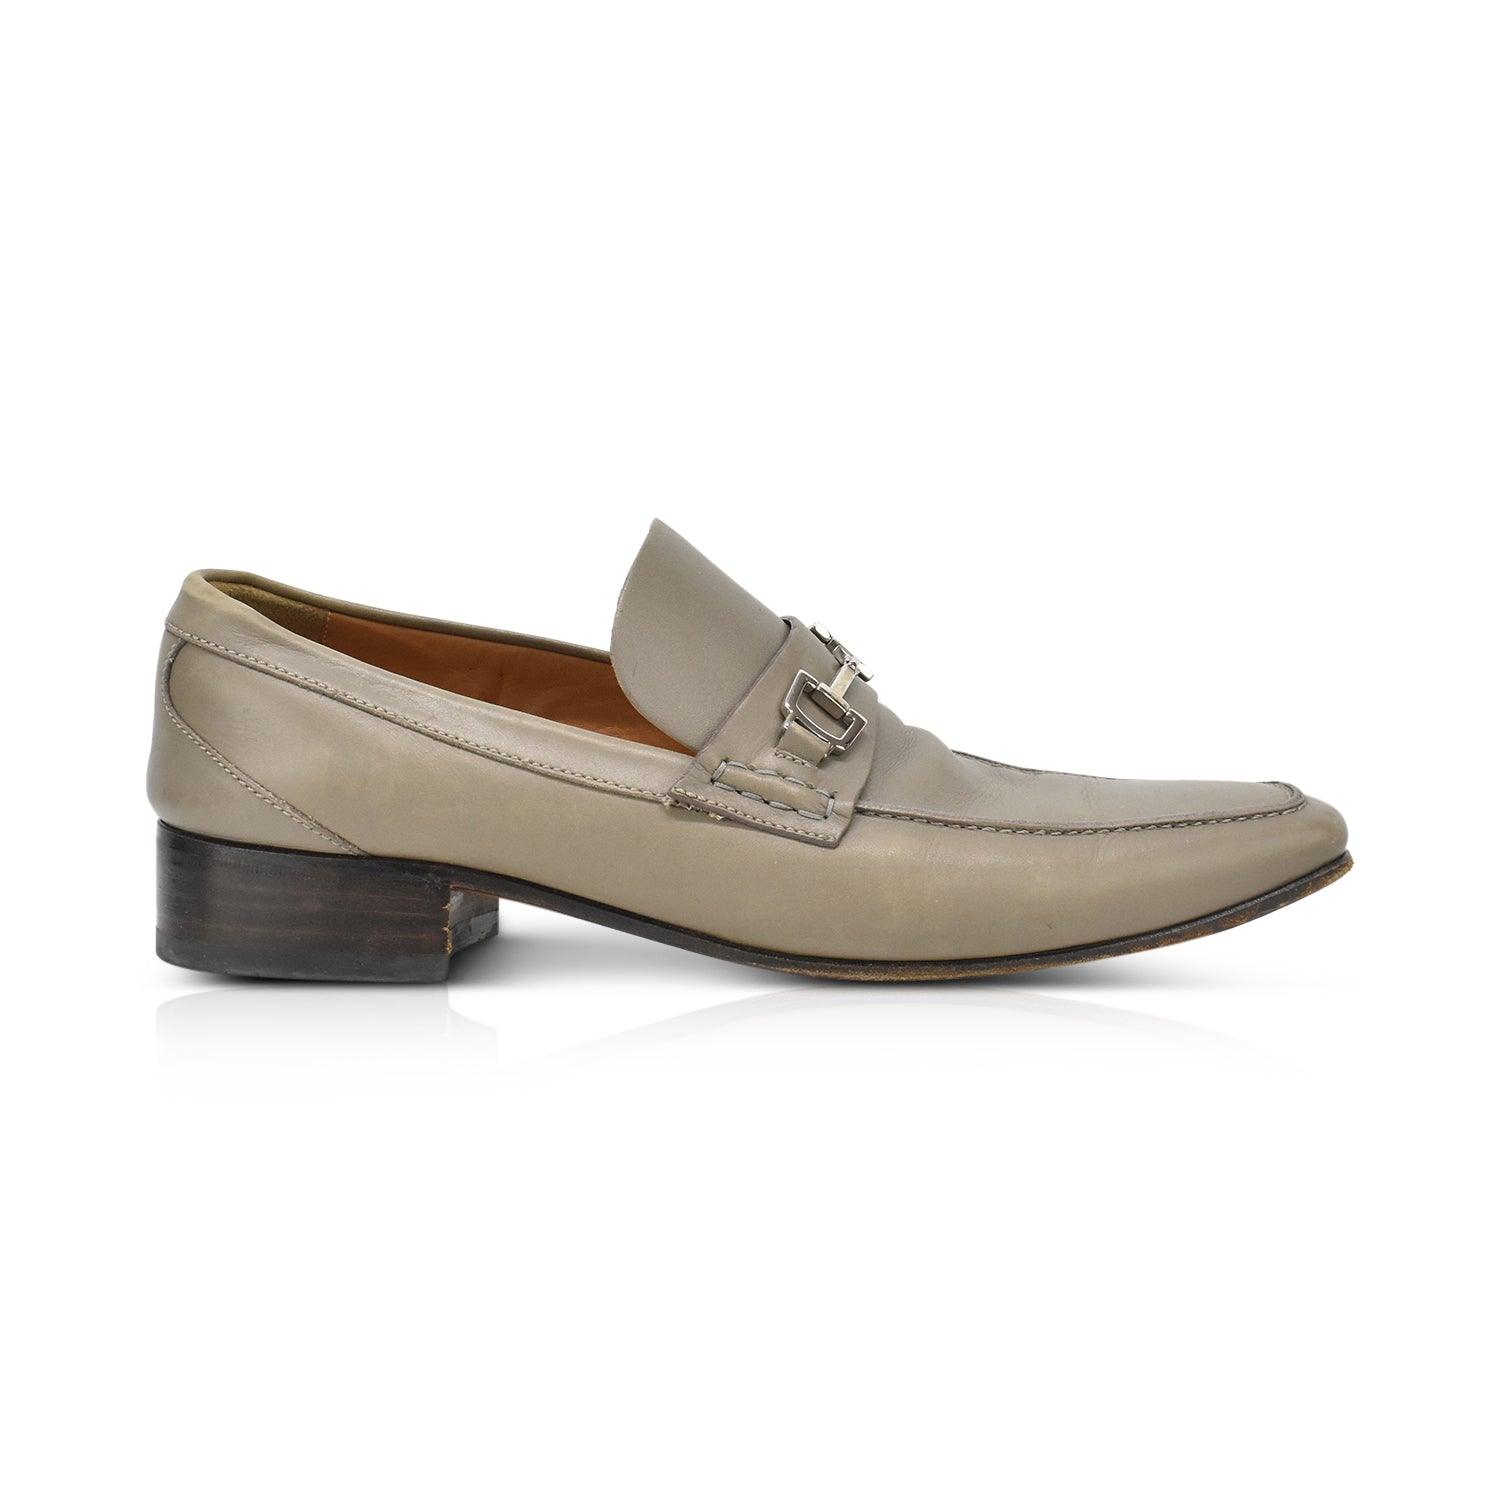 Gucci Loafers - Men's 7.5 - Fashionably Yours